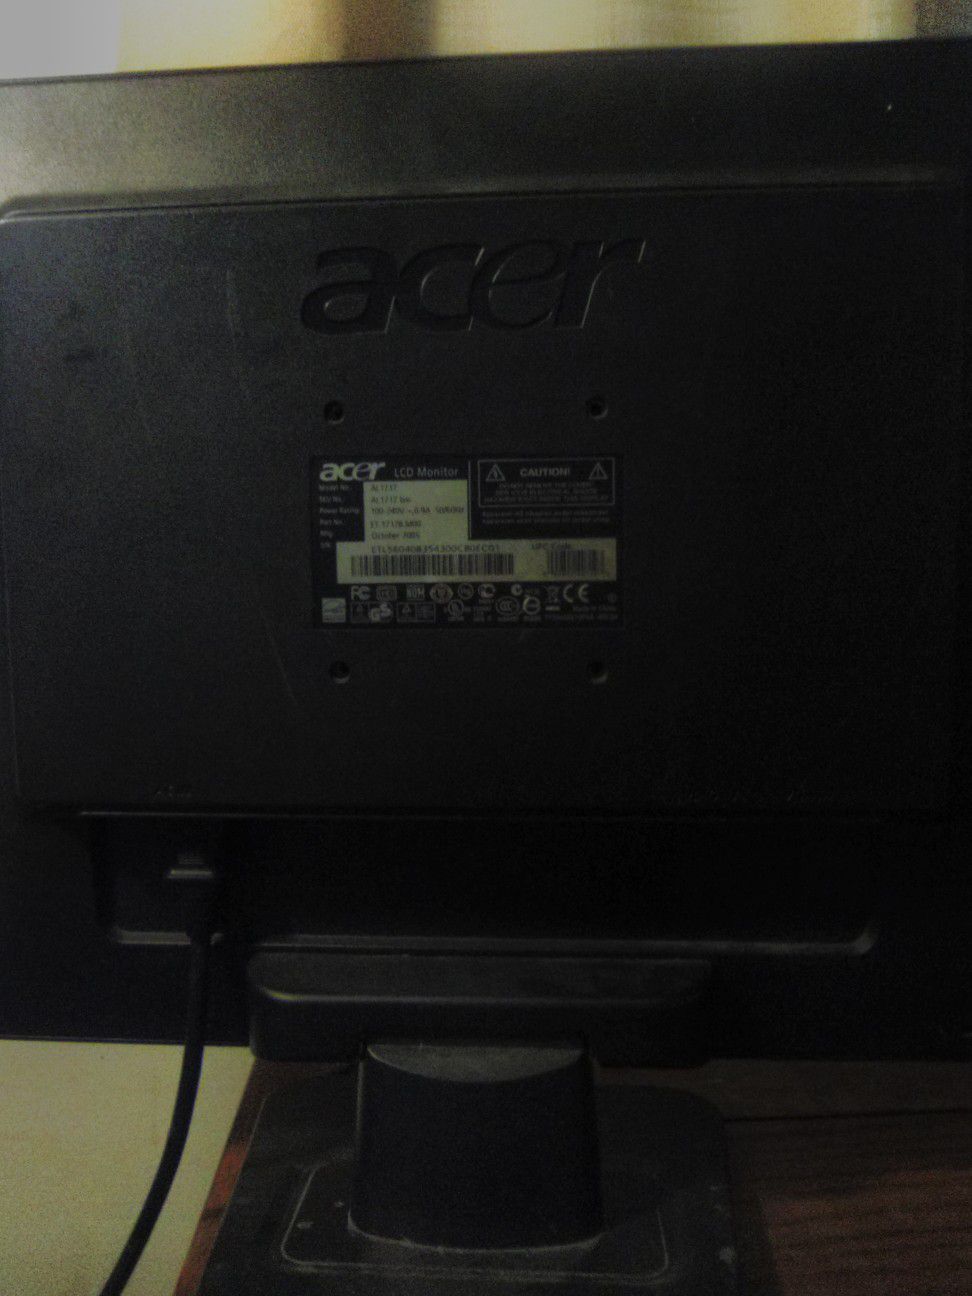 17" Flat screen Acer computer monitor